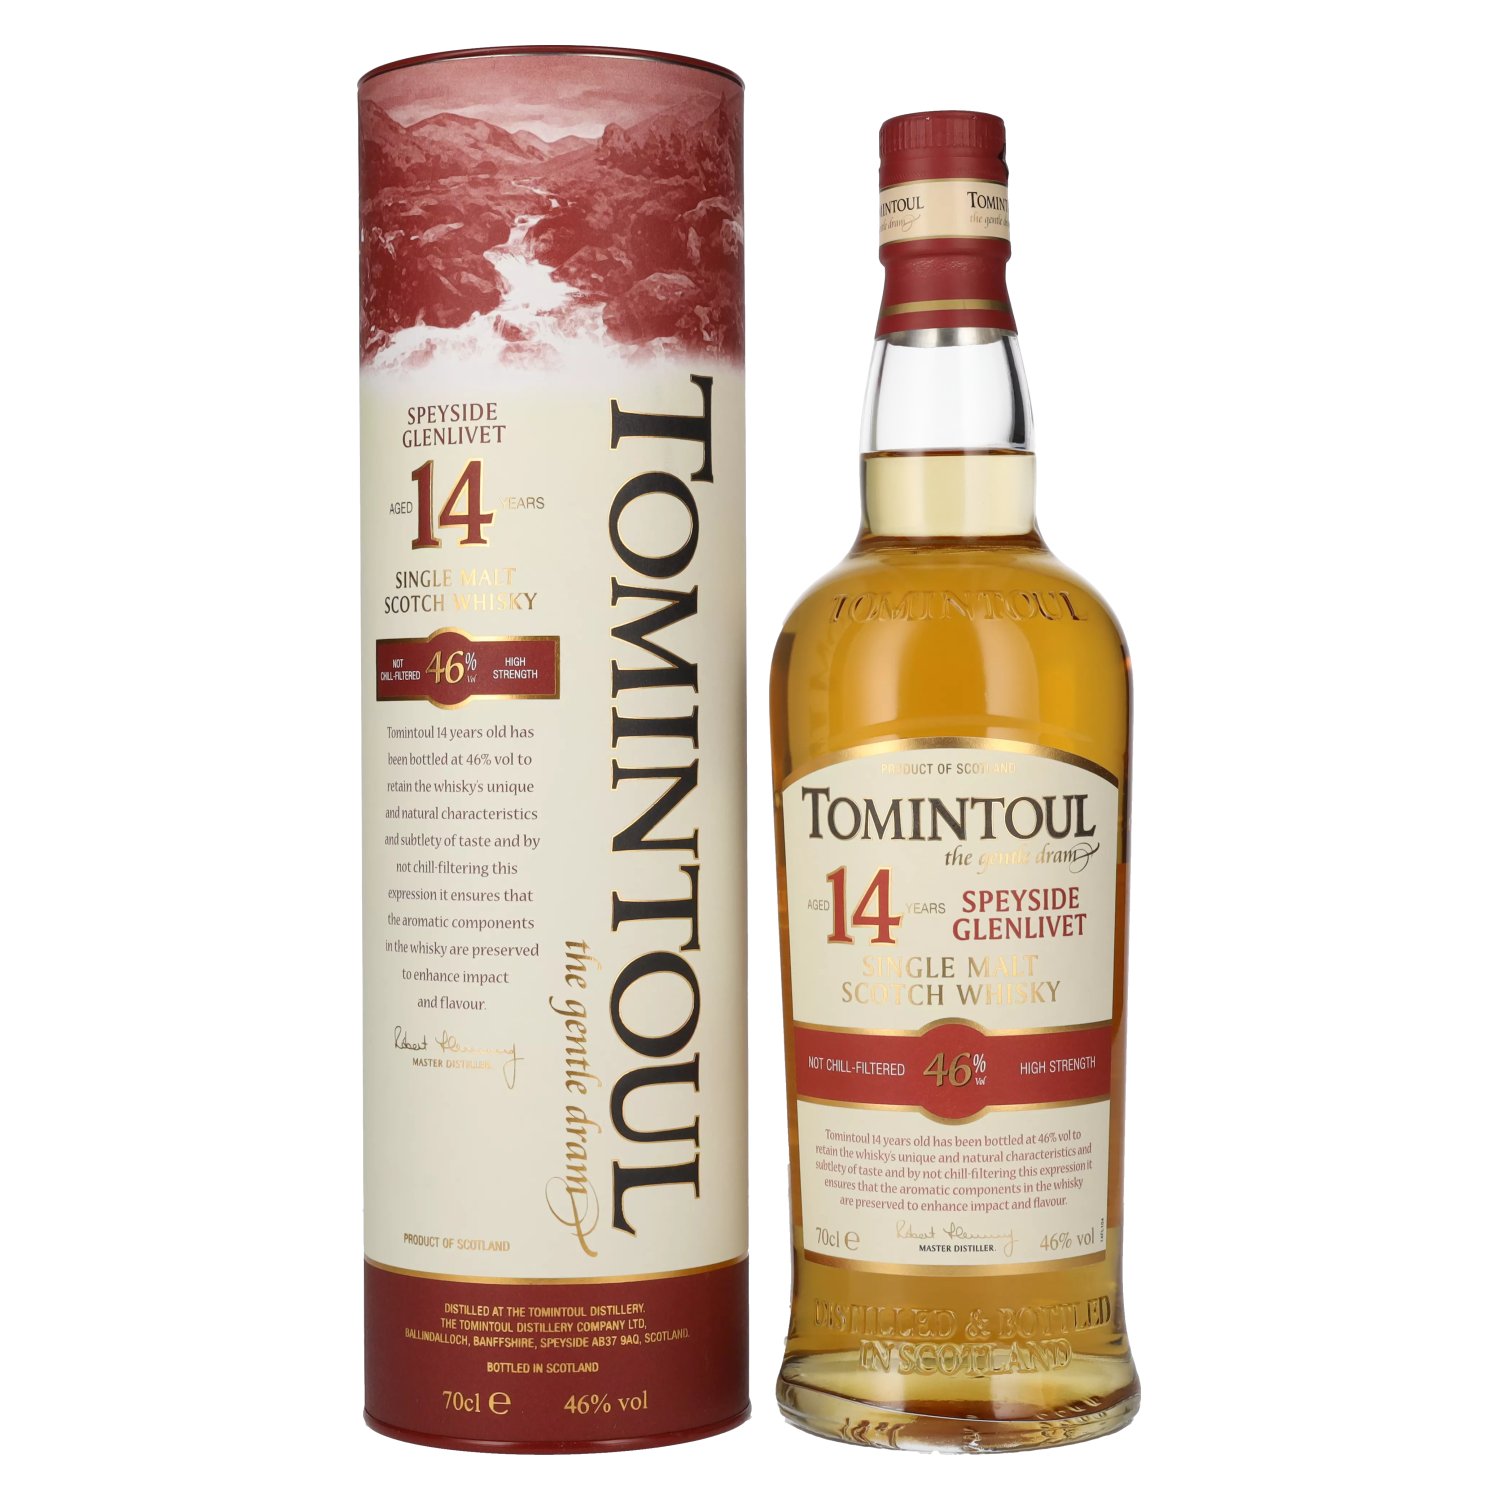 Tomintoul 14 Years Malt Scotch 0,7l Whisky 46% Geschenkbox in Single Vol. Old